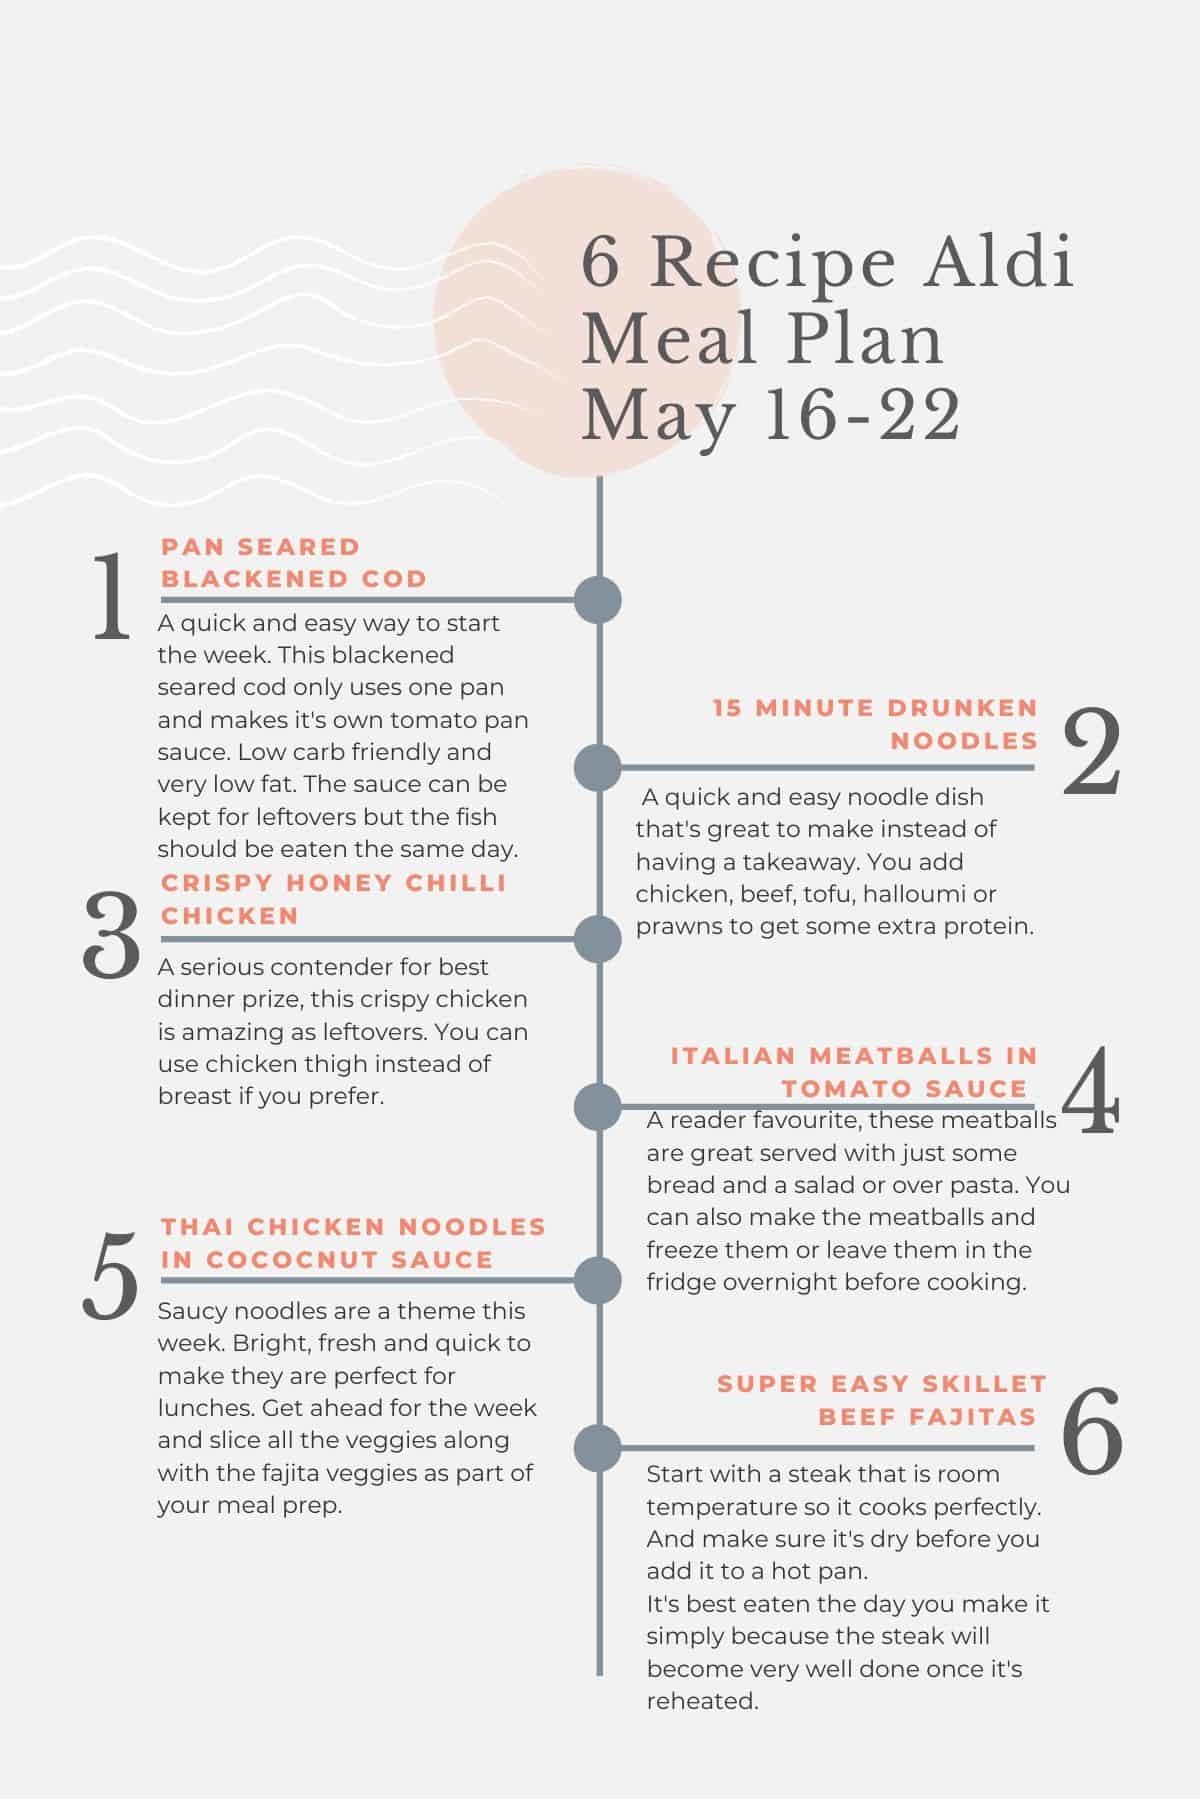 Aldi meal plan tips and tricks